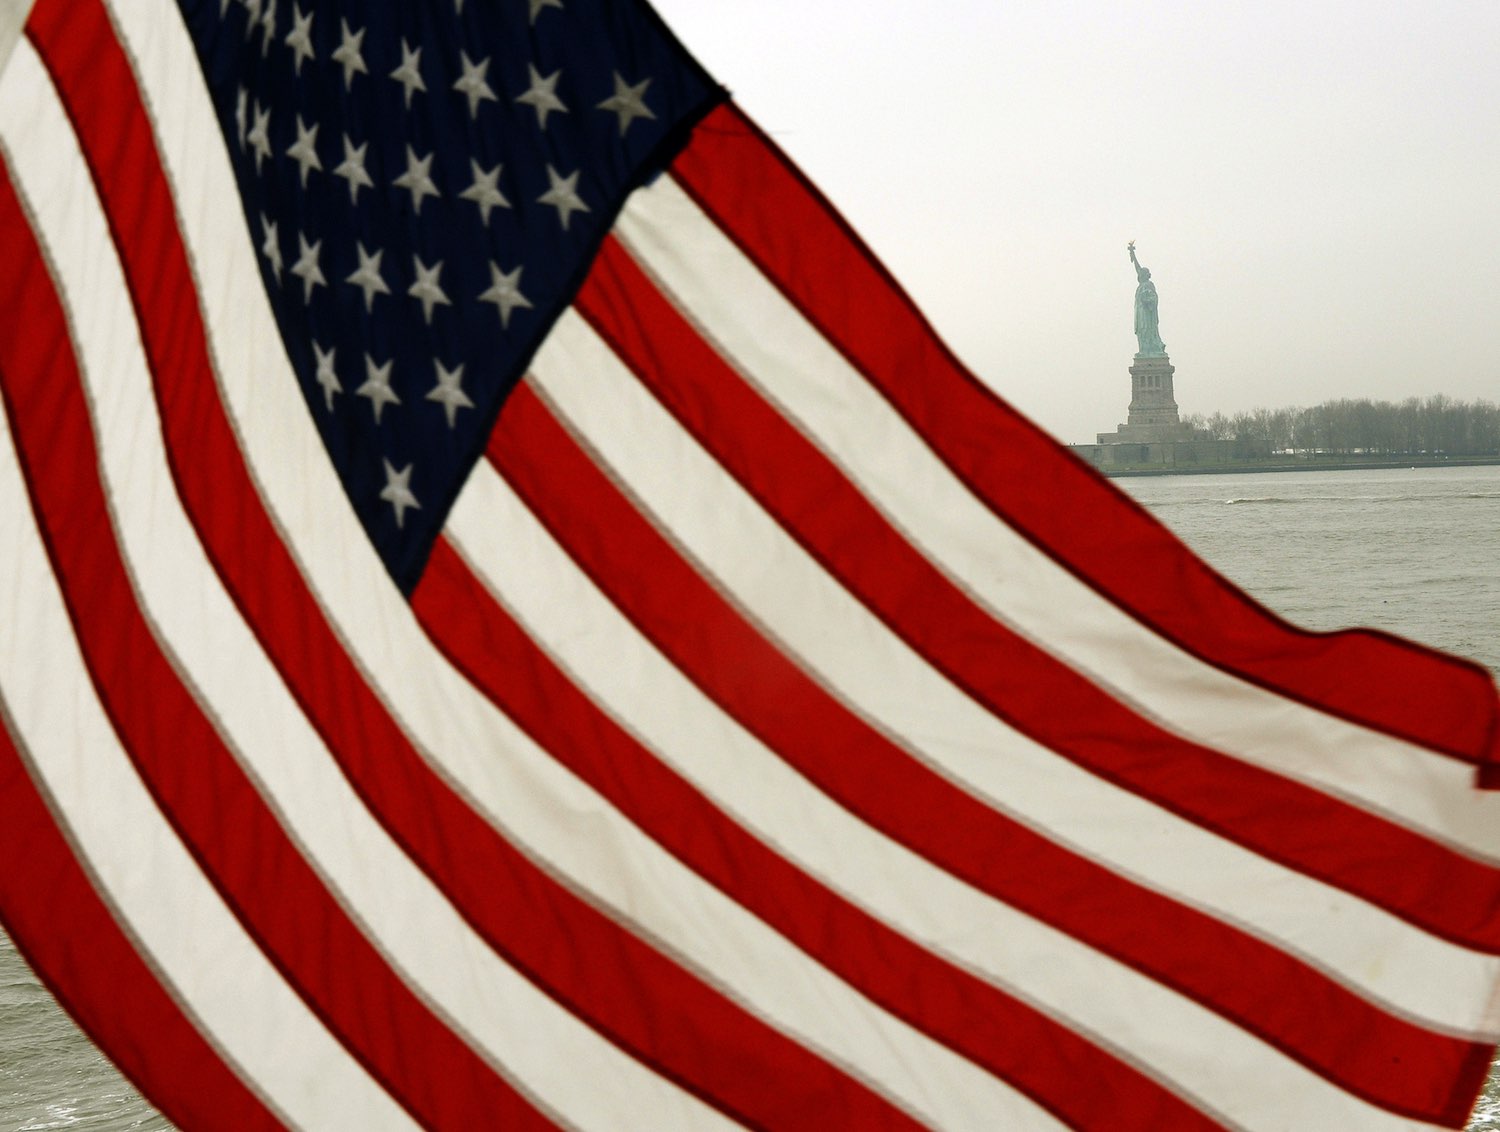 The U.S.A. national flag in the foreground, with the statue of liberty standing in the background.